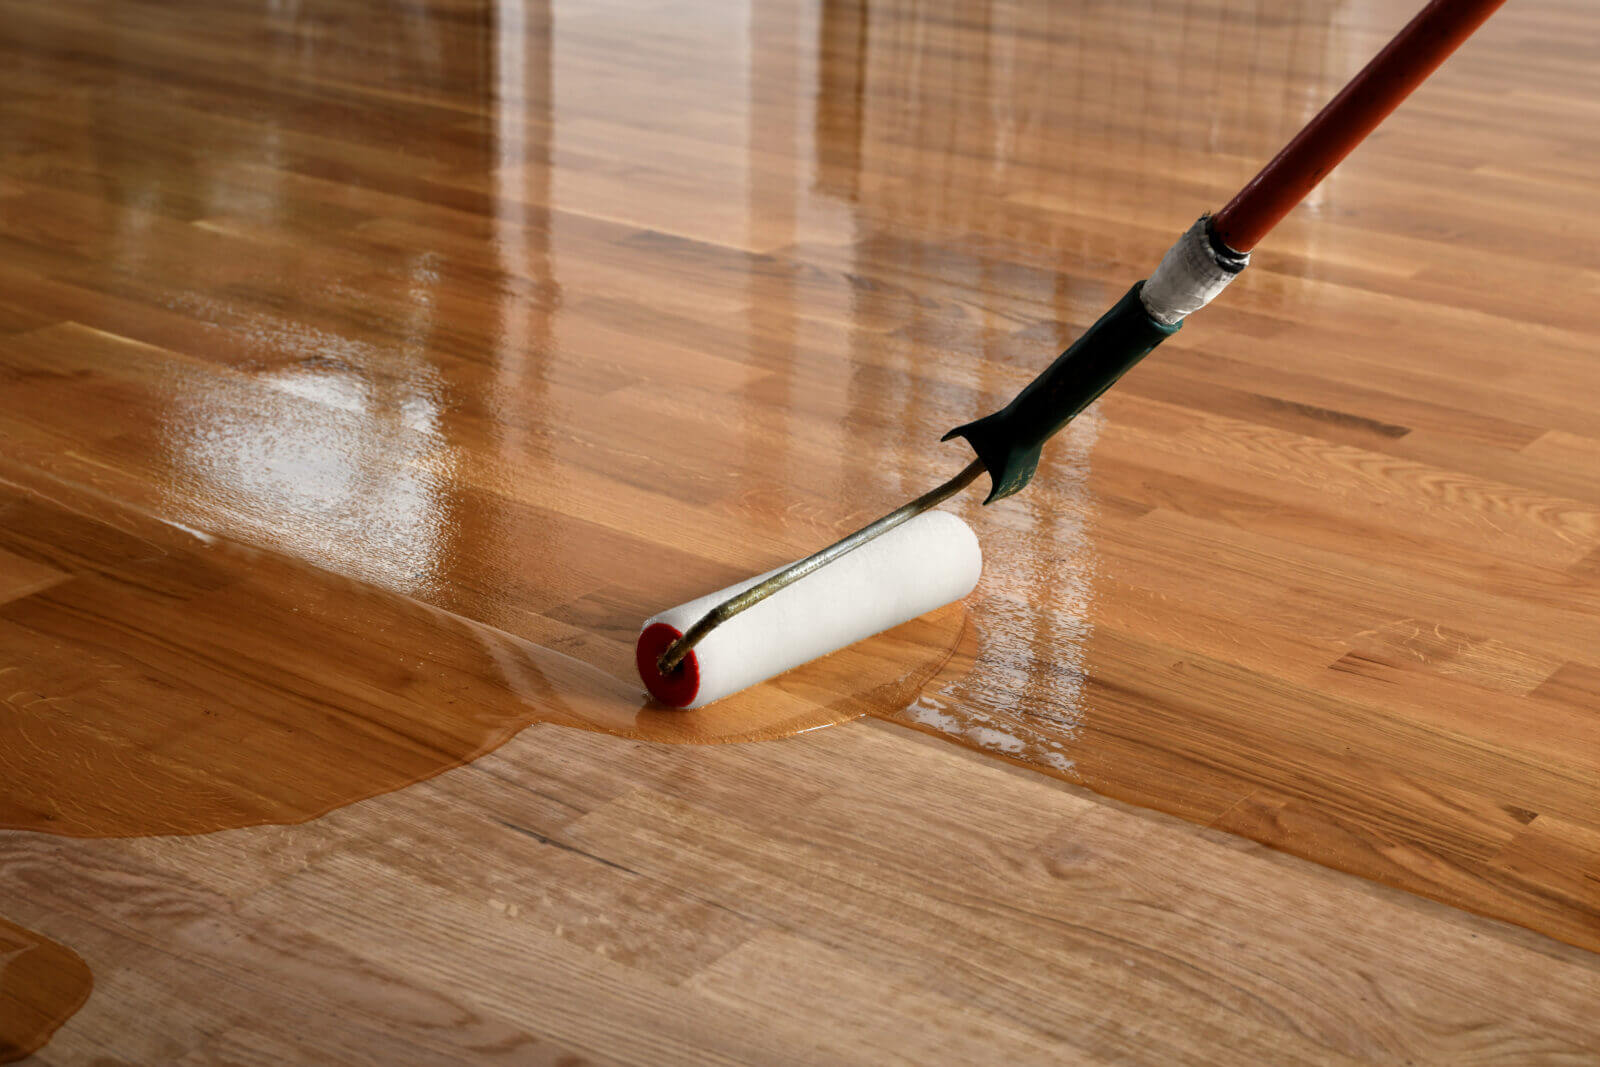 stufex - Lacquering wood floors. Worker uses a roller to coating floors.